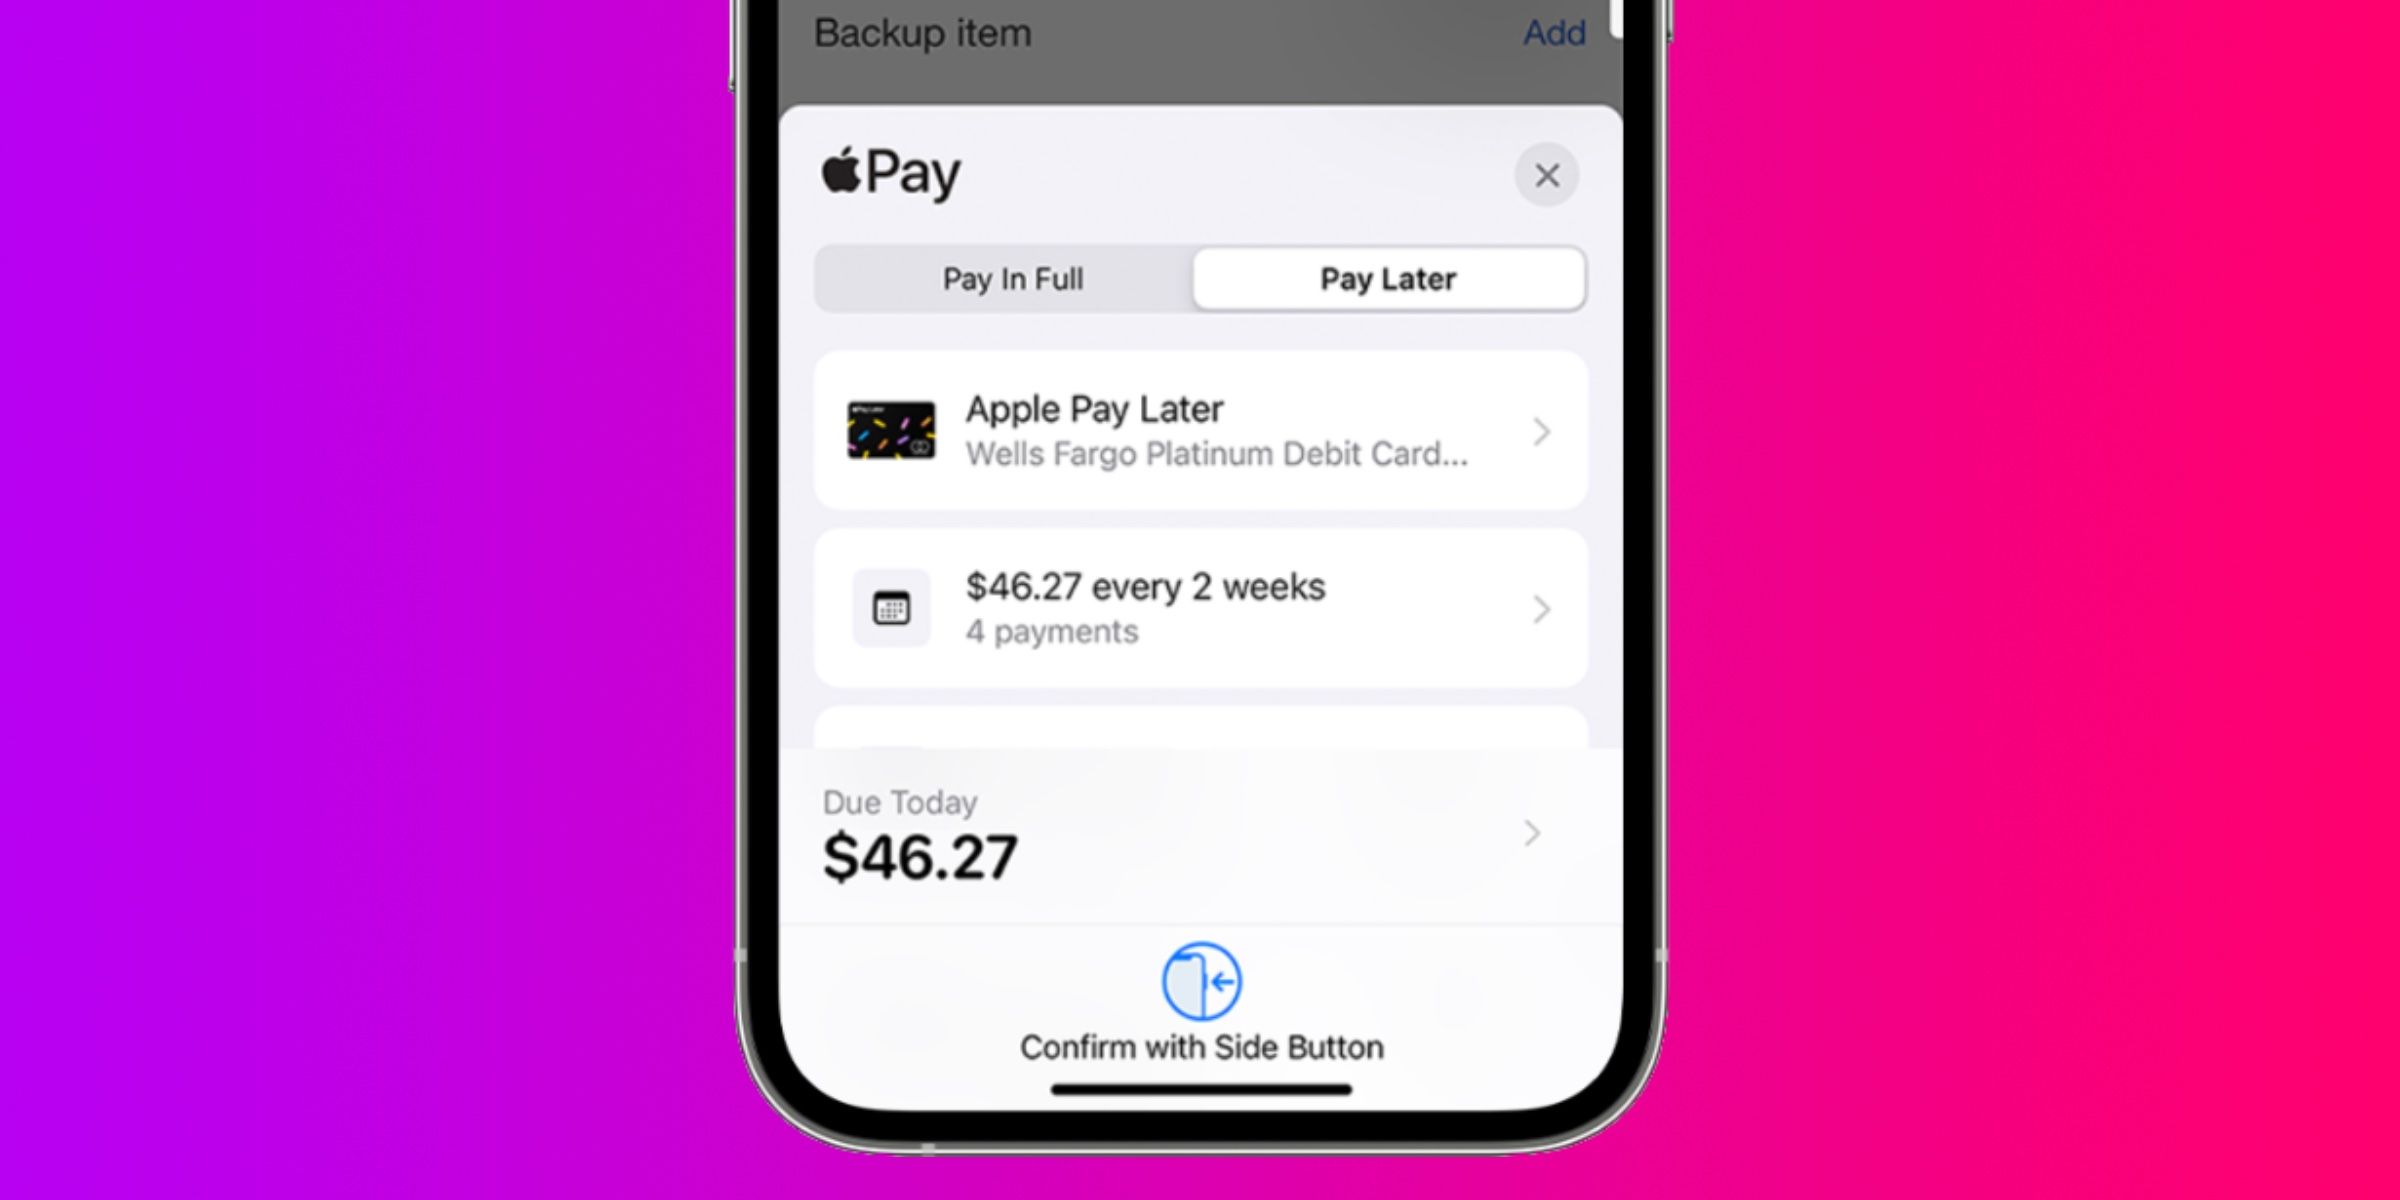 When Will Apple Pay Later Make Its Public Debut?